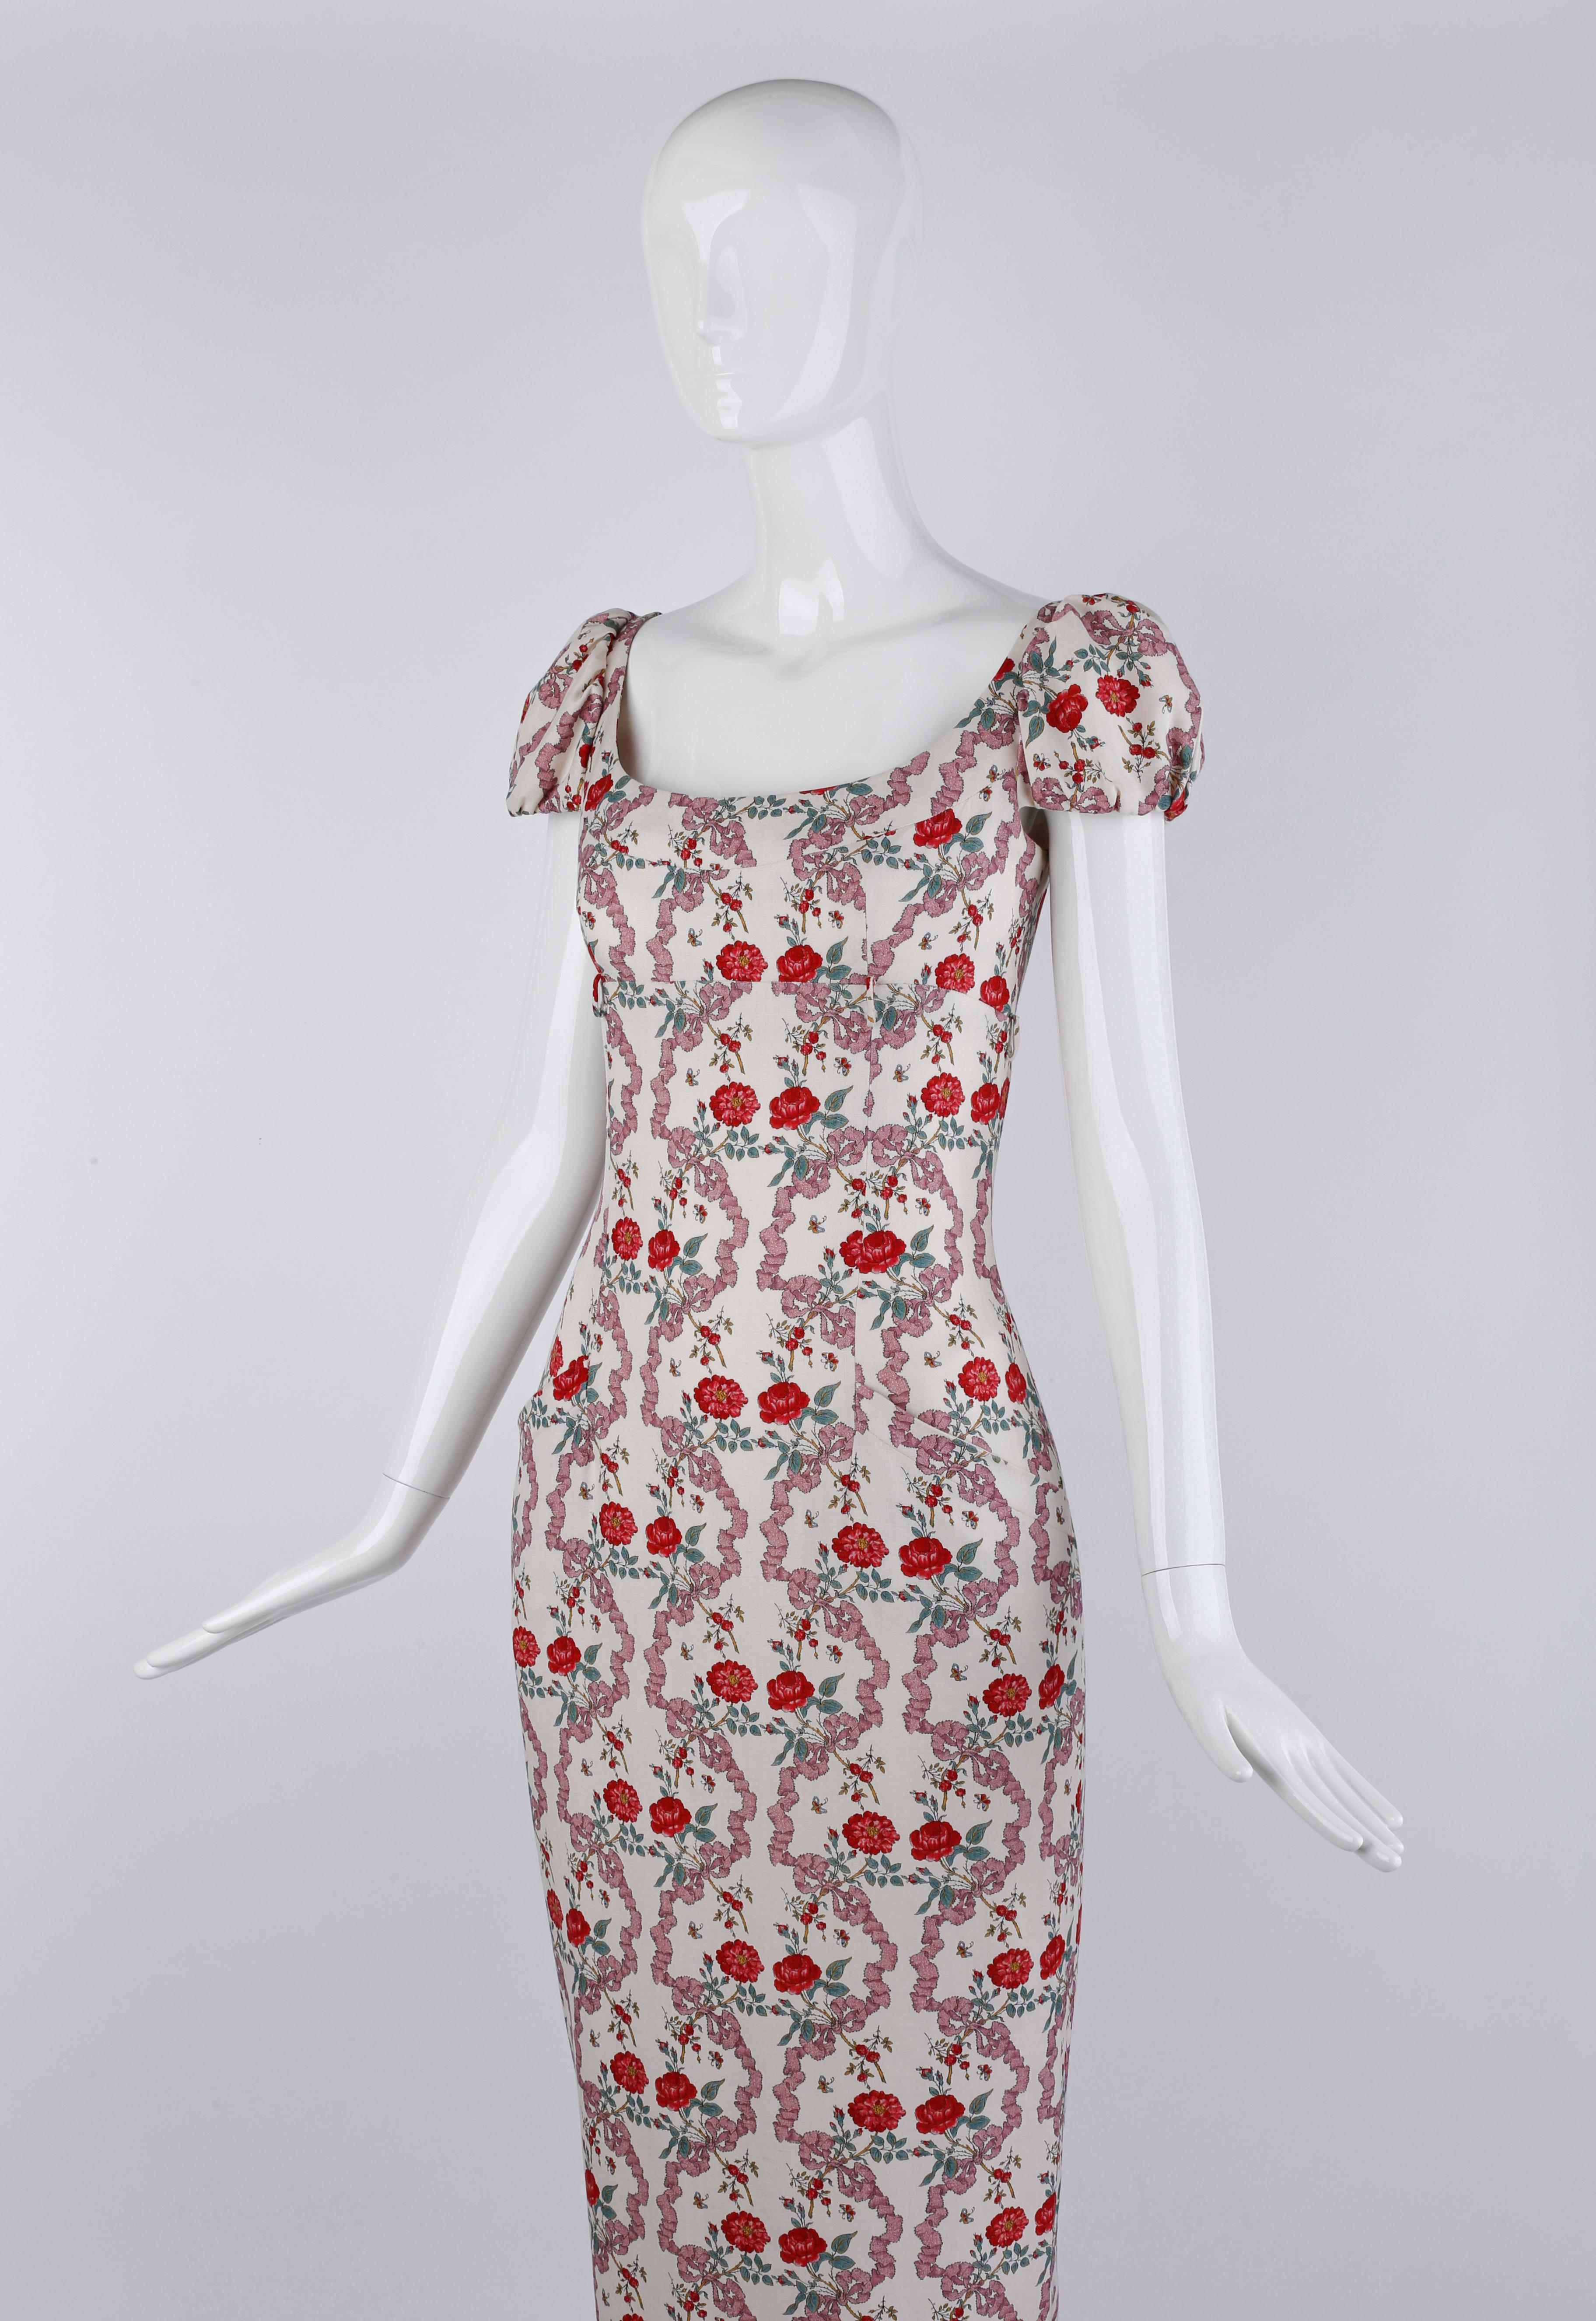 Givenchy Couture John Galliano S/S 1997 Bouquet Floral Ribbon Print Midi Dress For Sale 4